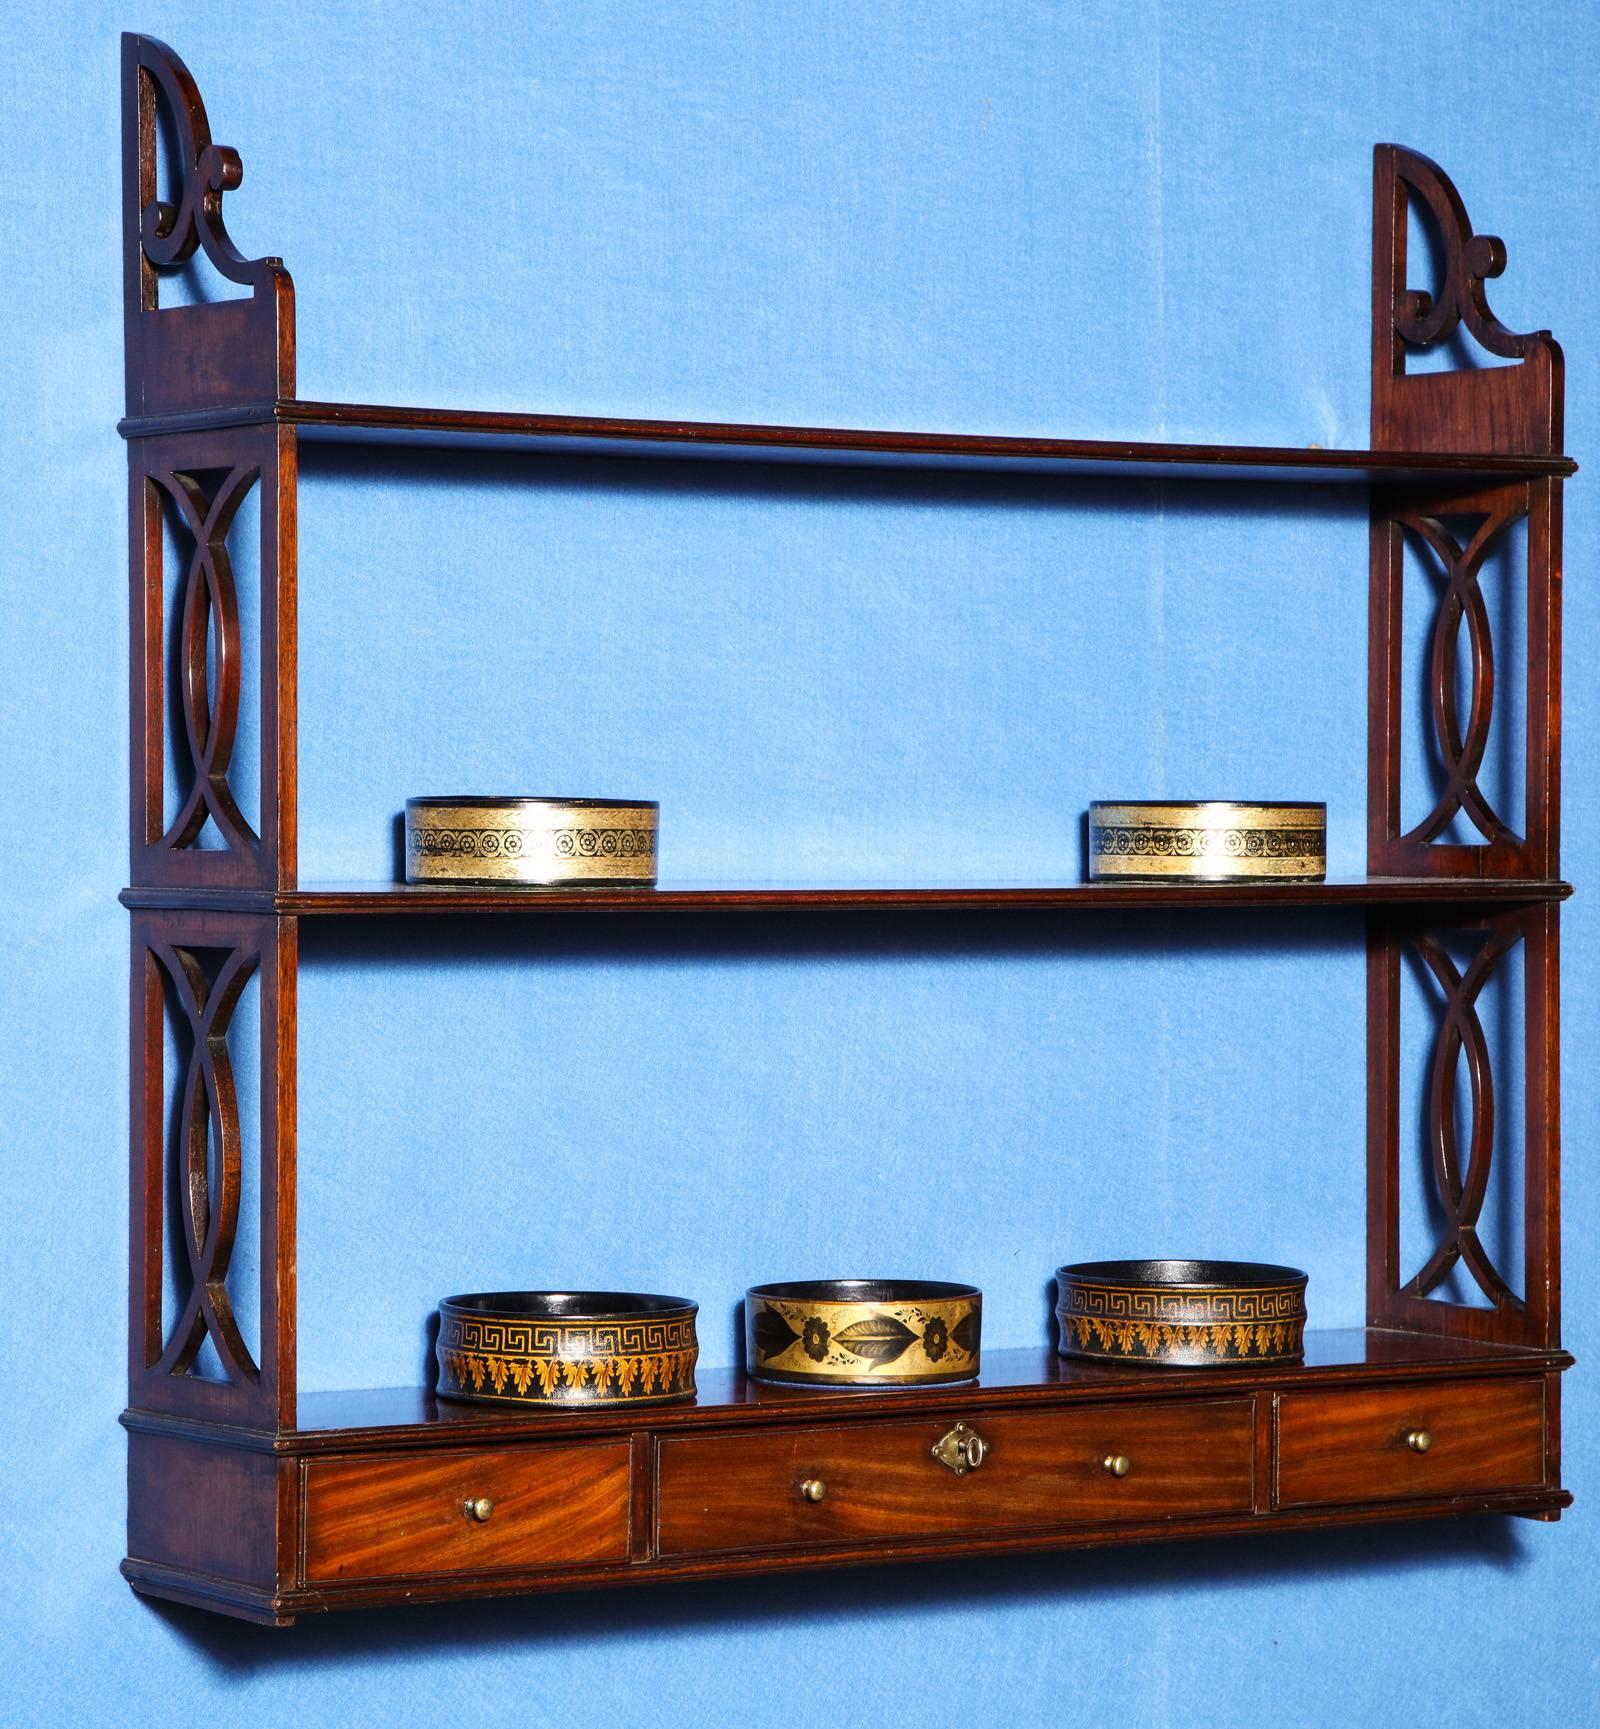 A finely figured set of Chinese Chippendale period carved mahogany hanging shelves, having pierced scrolled and fretwork supports joining three shelves, above three mahogany-lined drawers with original brass knobs, lock and escutcheon, one drawer